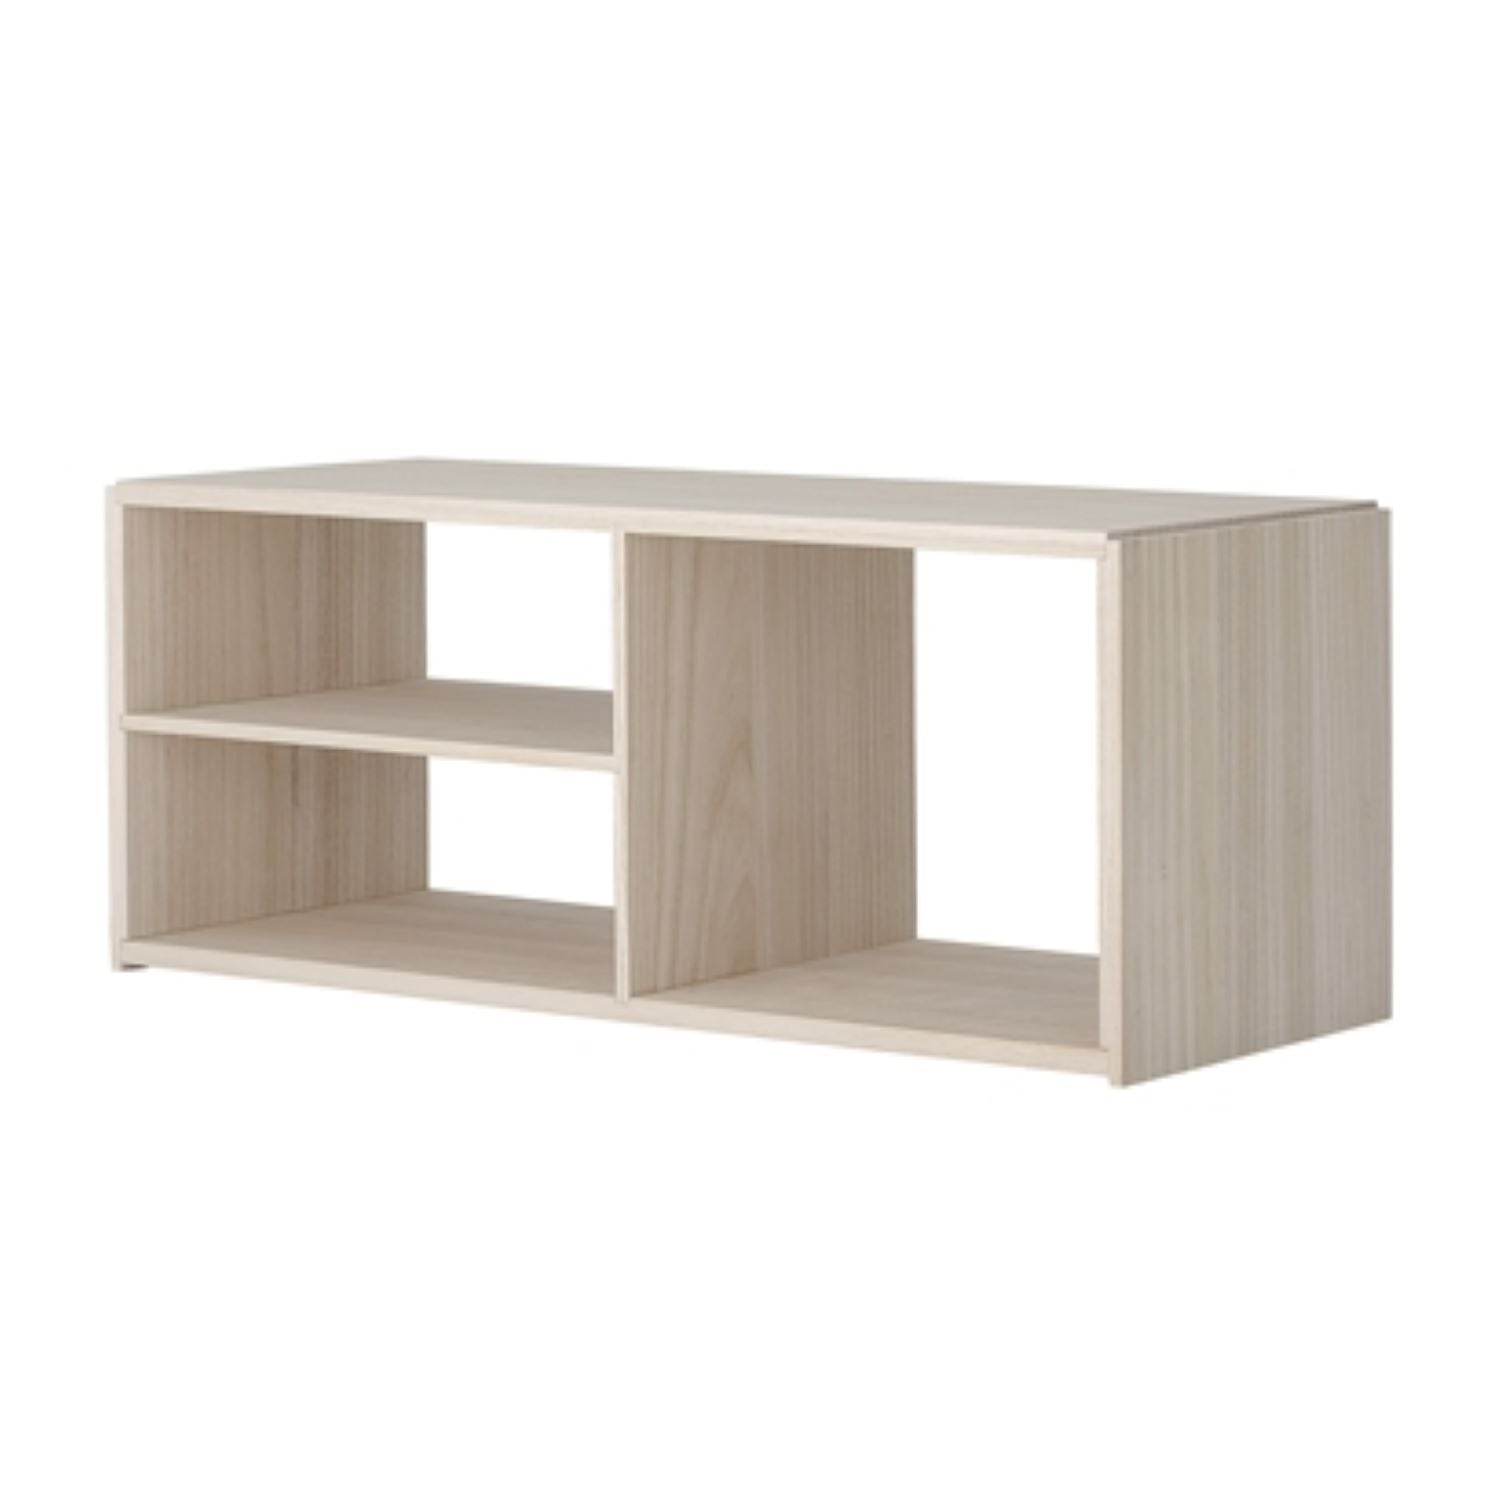 Bloomingville Aron Bookcase in Natural - Scandibørn